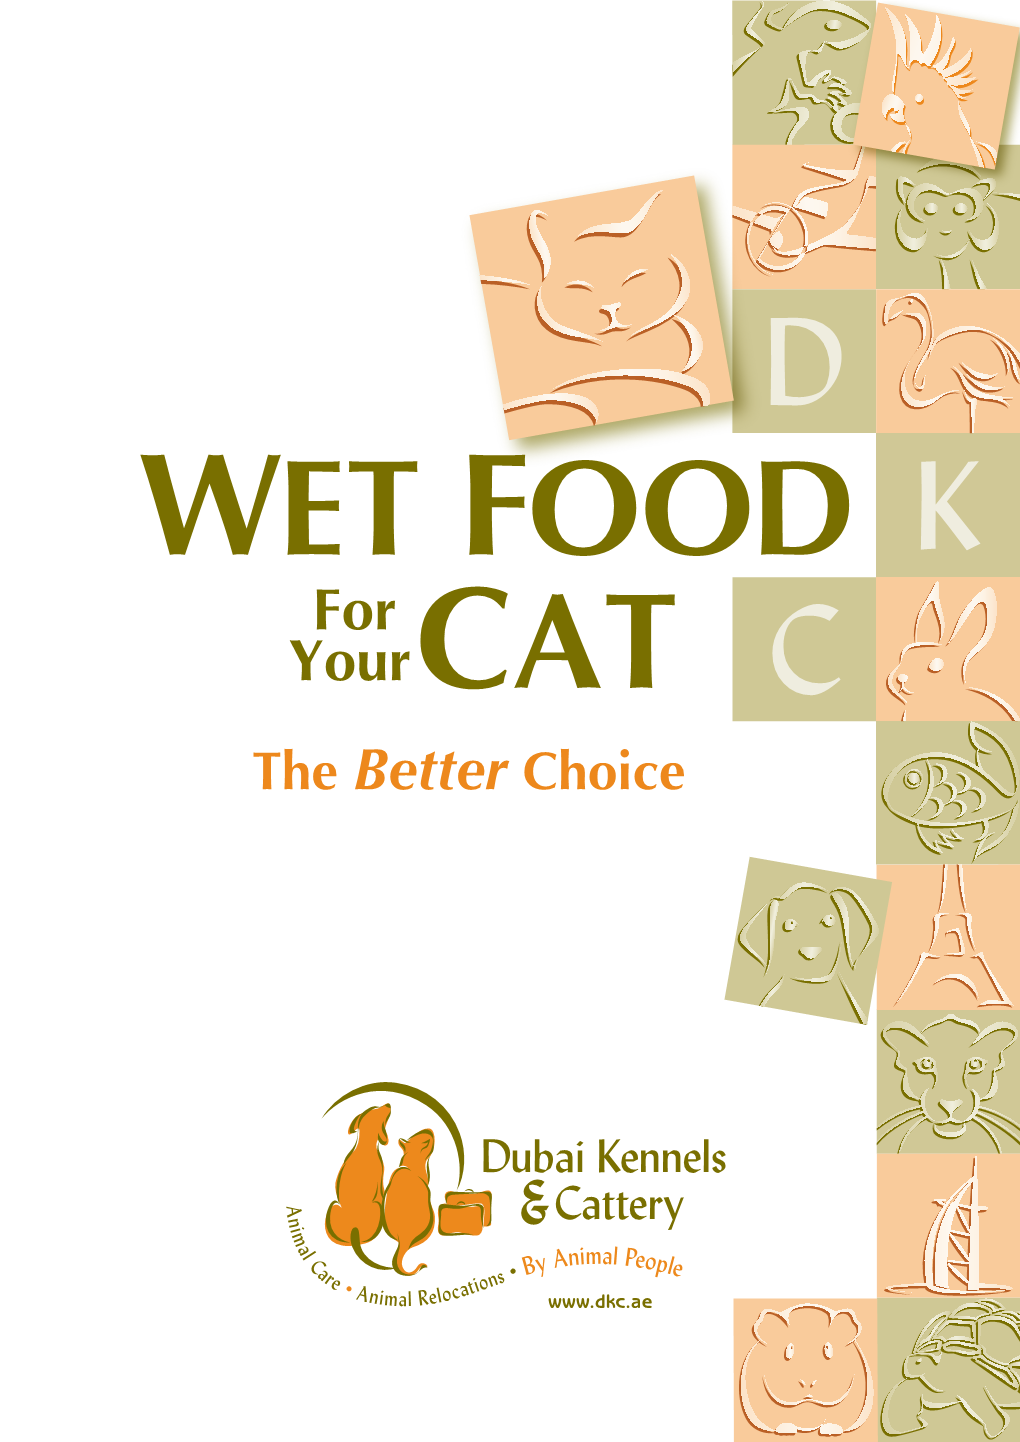 Wet Food for Your Cat...The Better Choice Come from an Animal Source